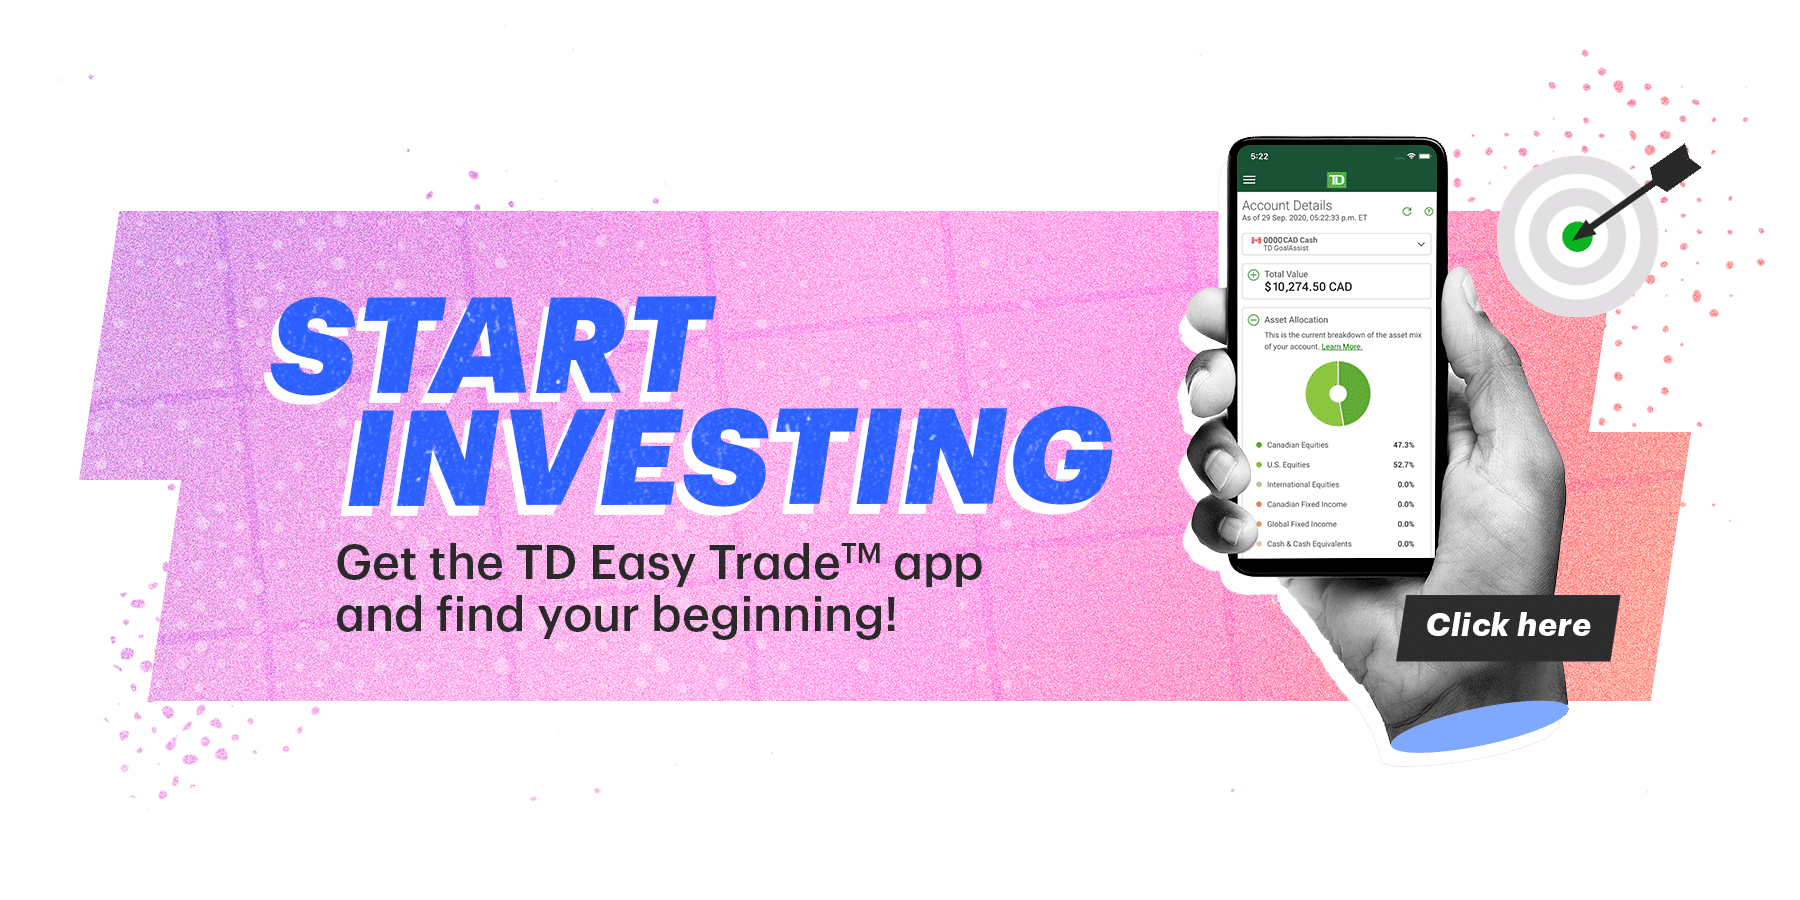 START INVESTING. Get the TD Easy Trade app and find your beginning!